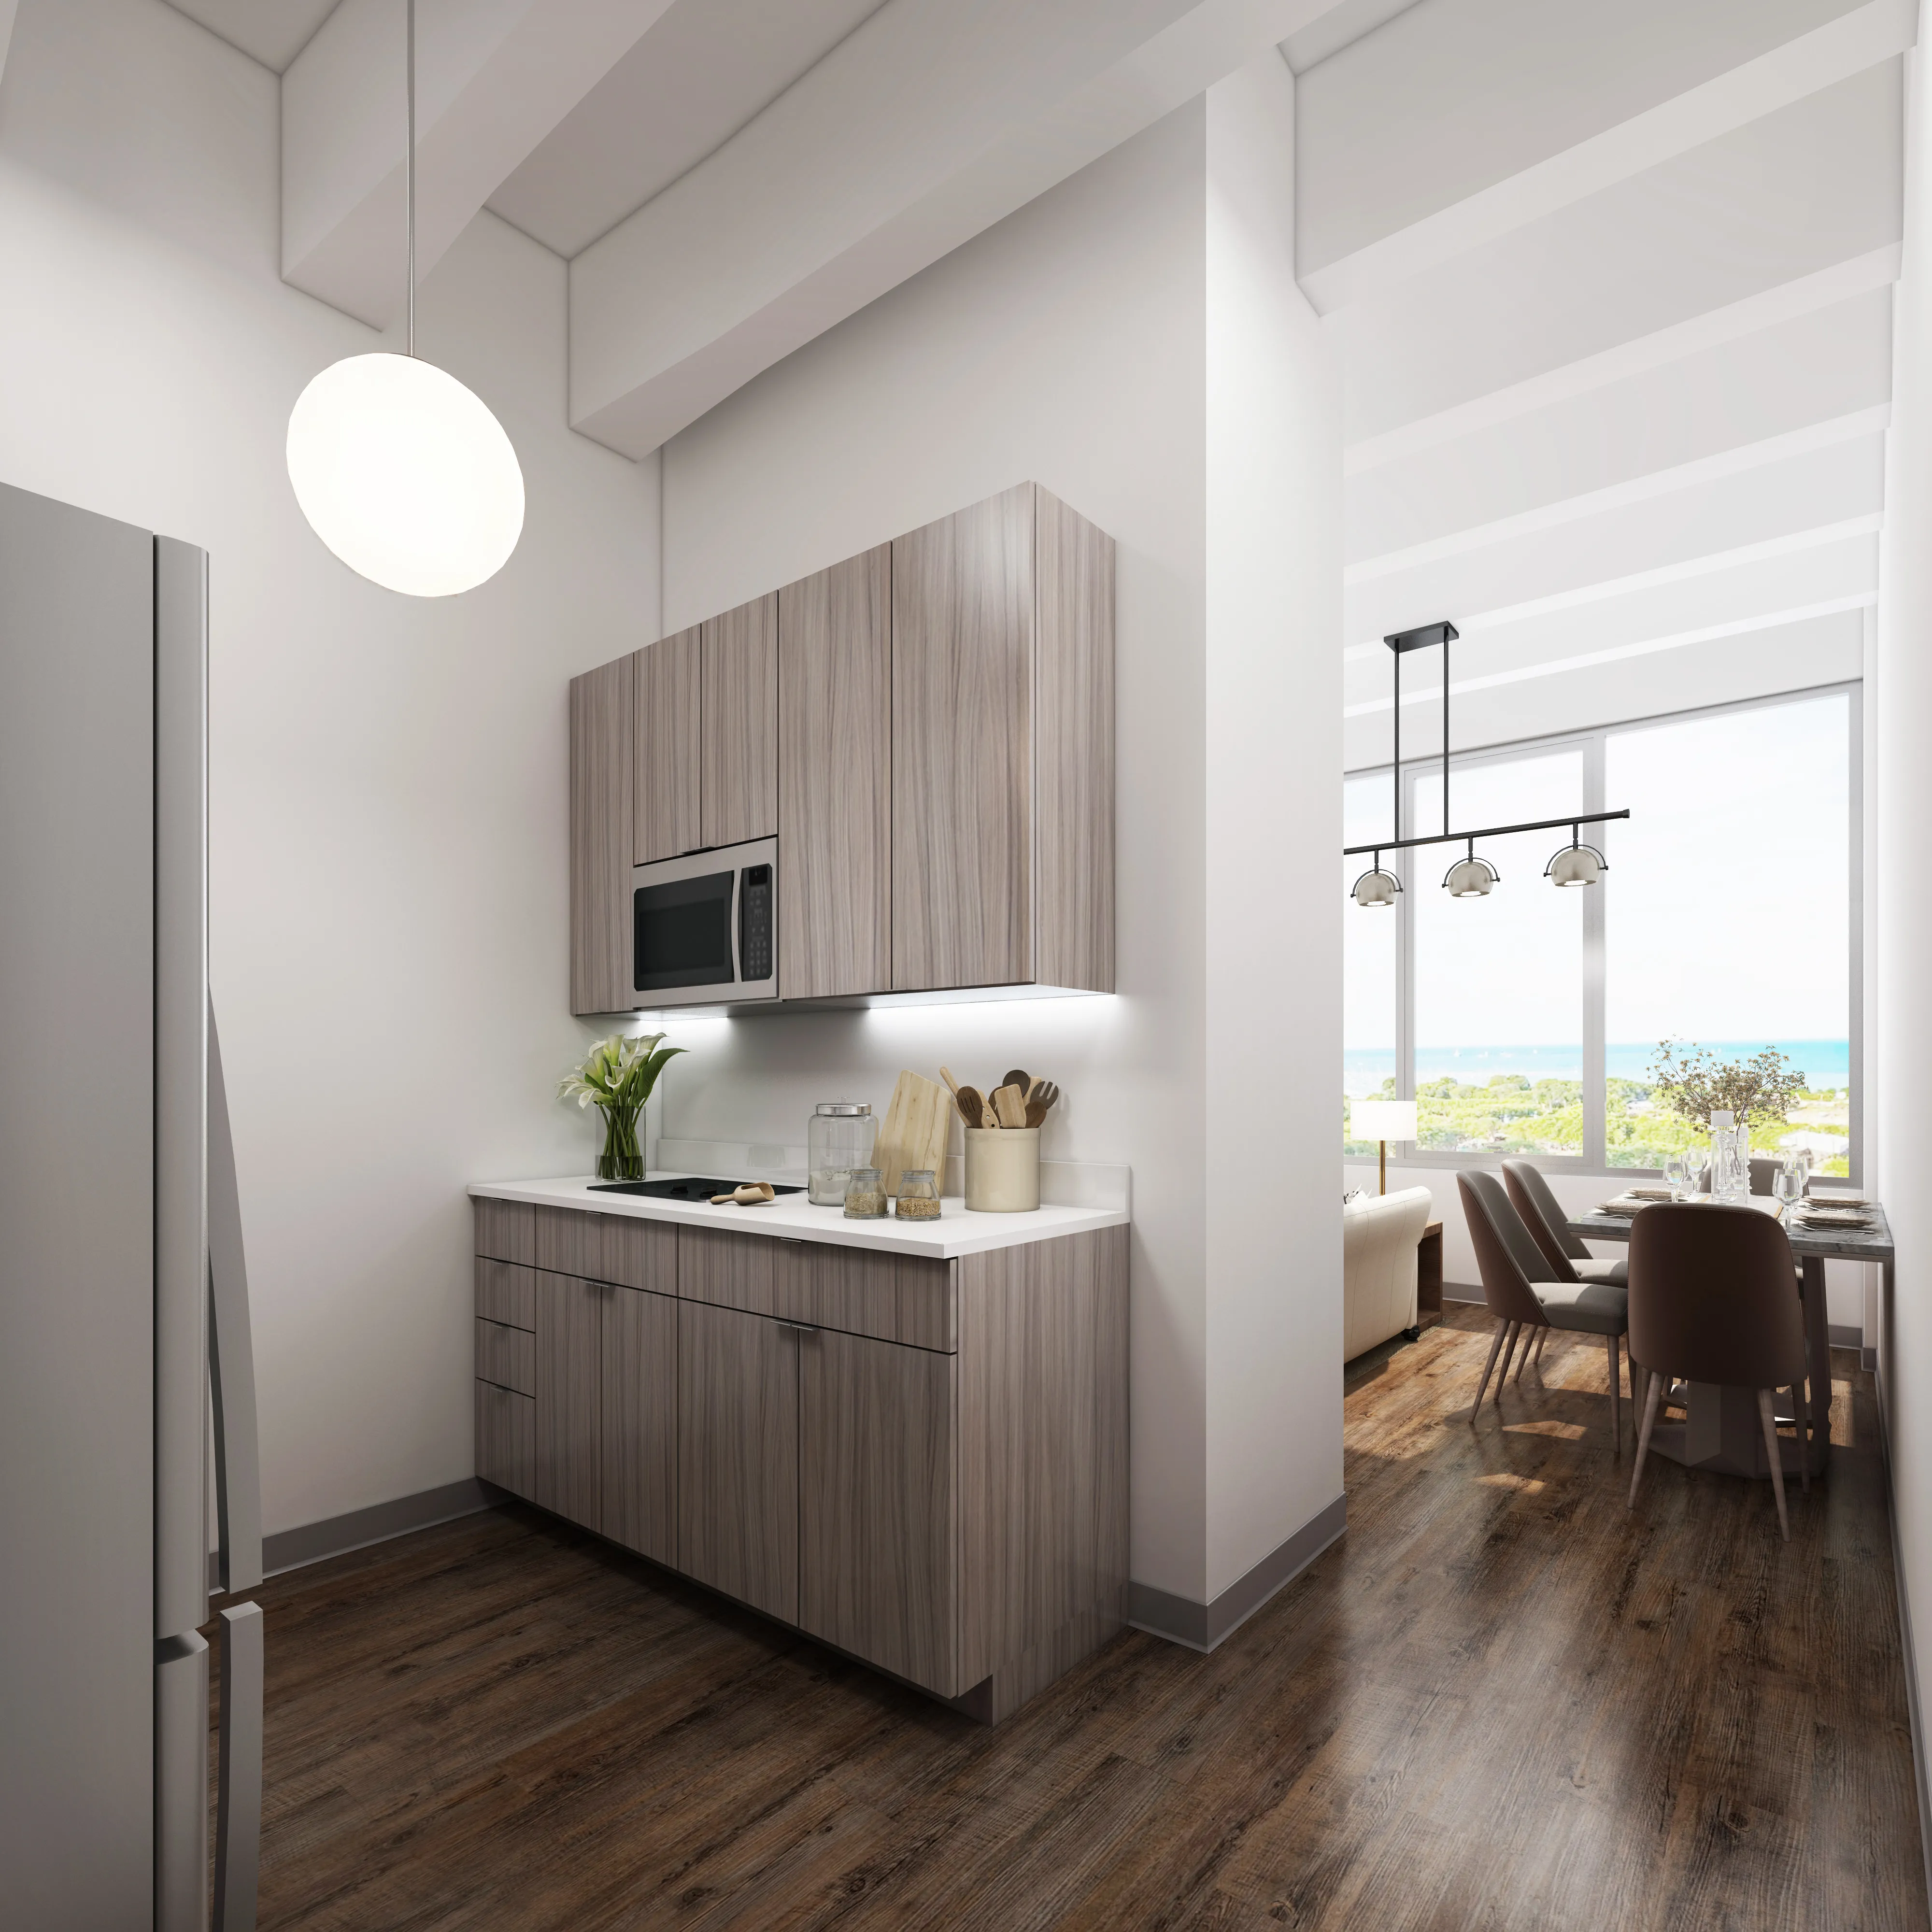 820 South Apartments offers Brand-New Kitchens with GE Appliances